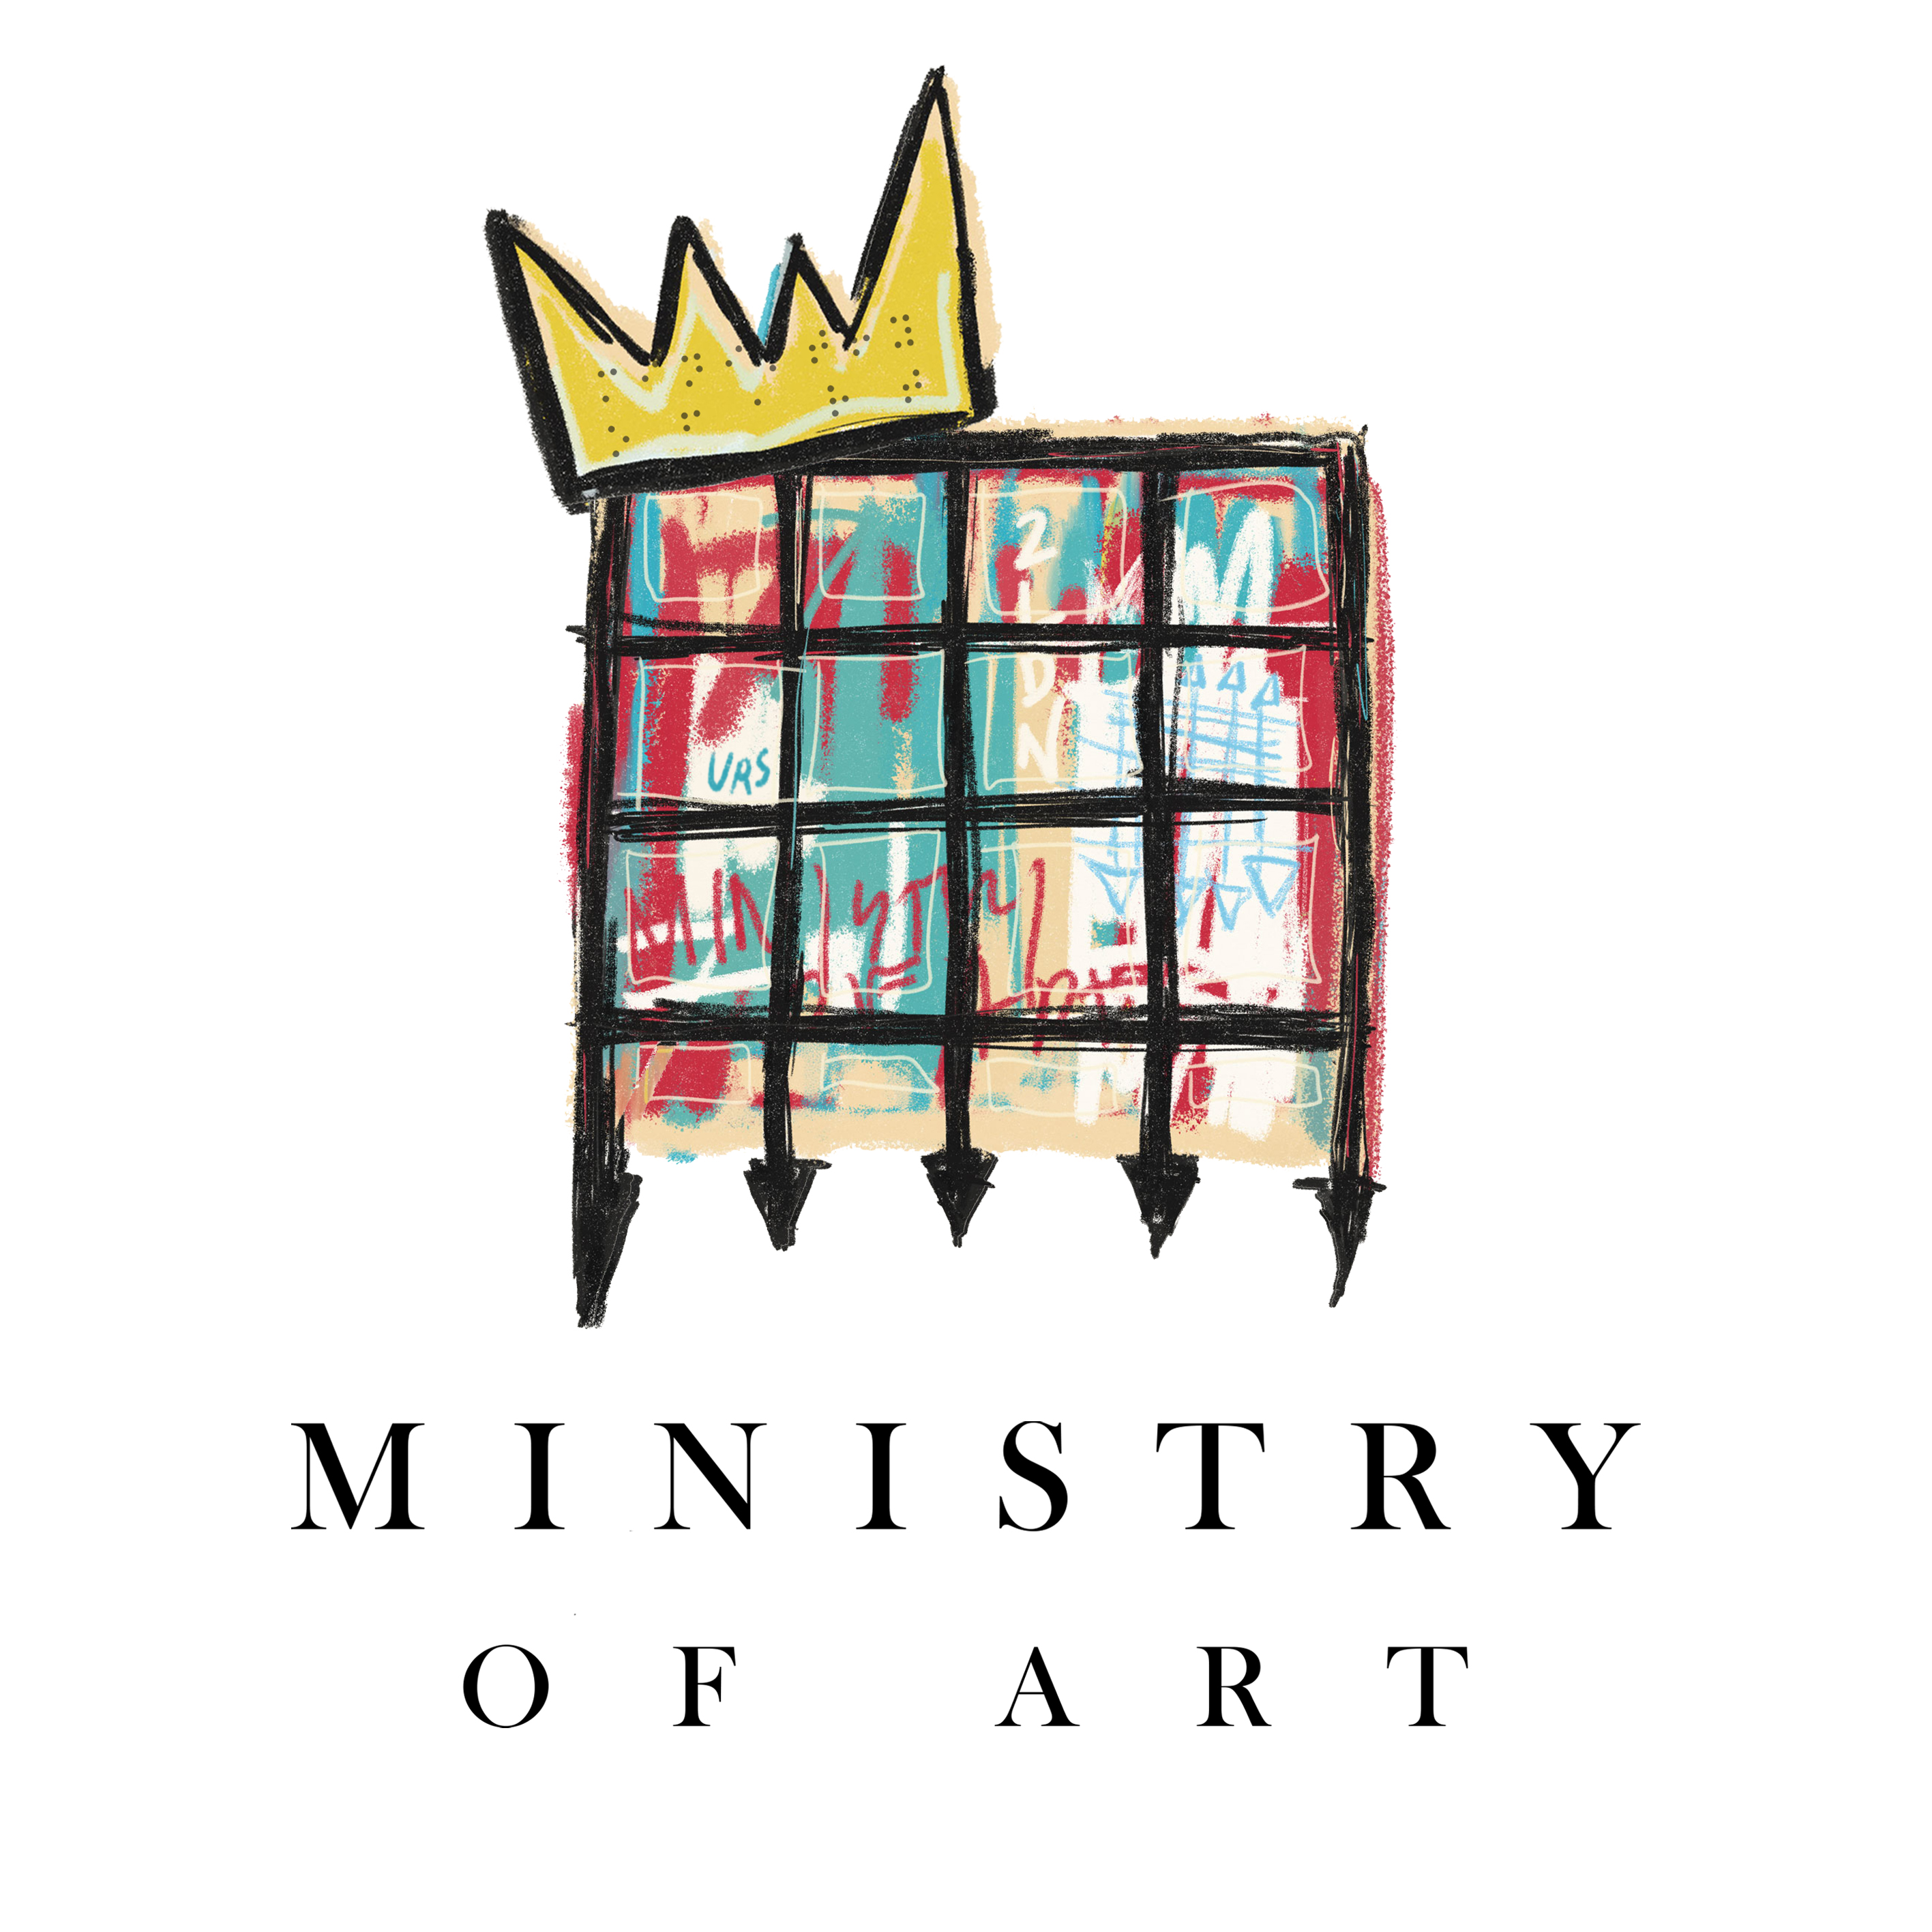 The Ministry of Art